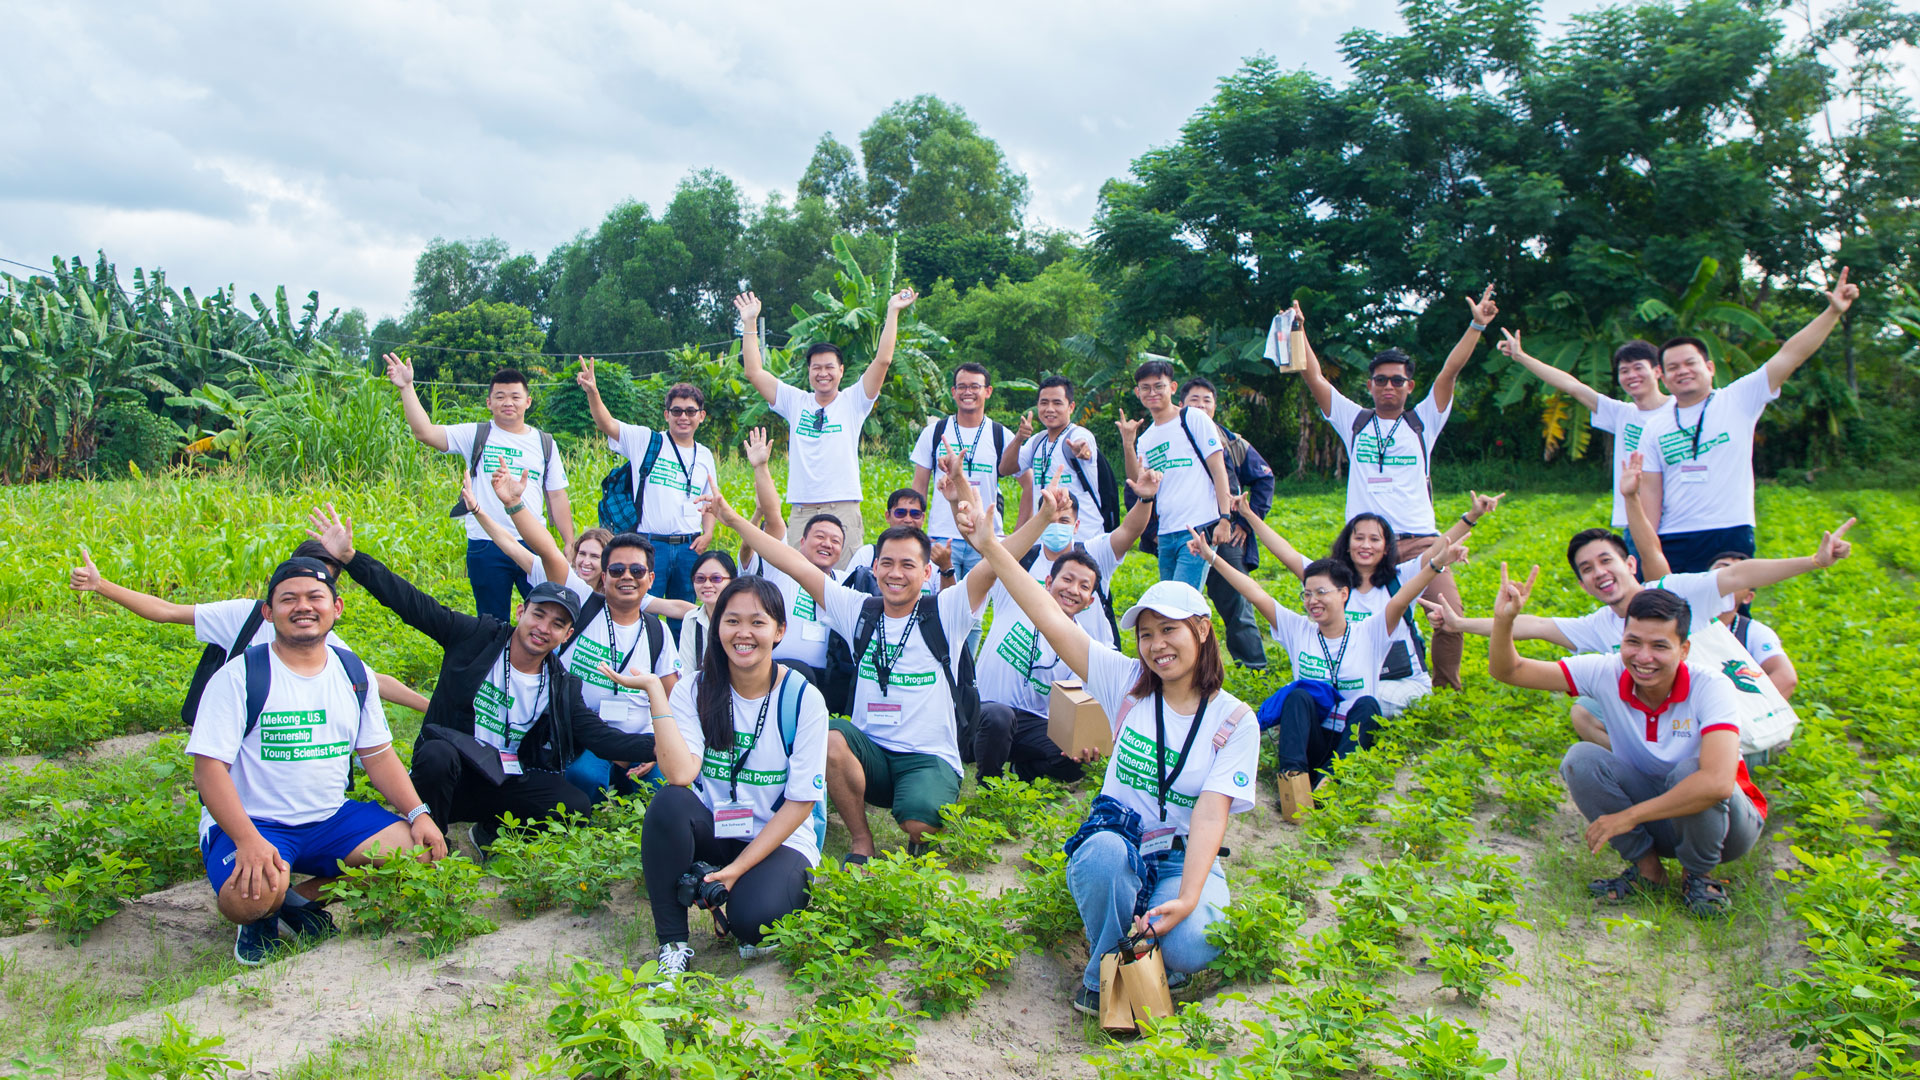 The Mekong-U.S. Partnership Young Scientist Program participants pose in an agricultural field in Vietnam.